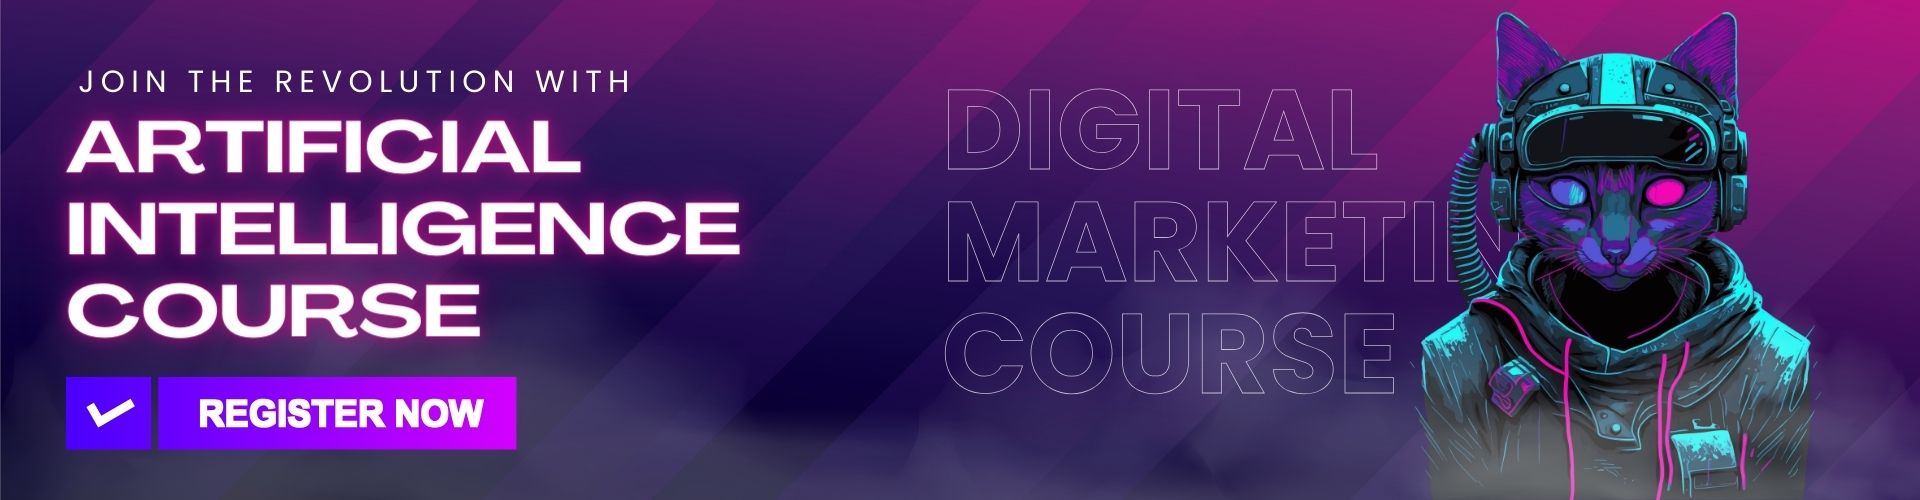 Top digital marketing course in india